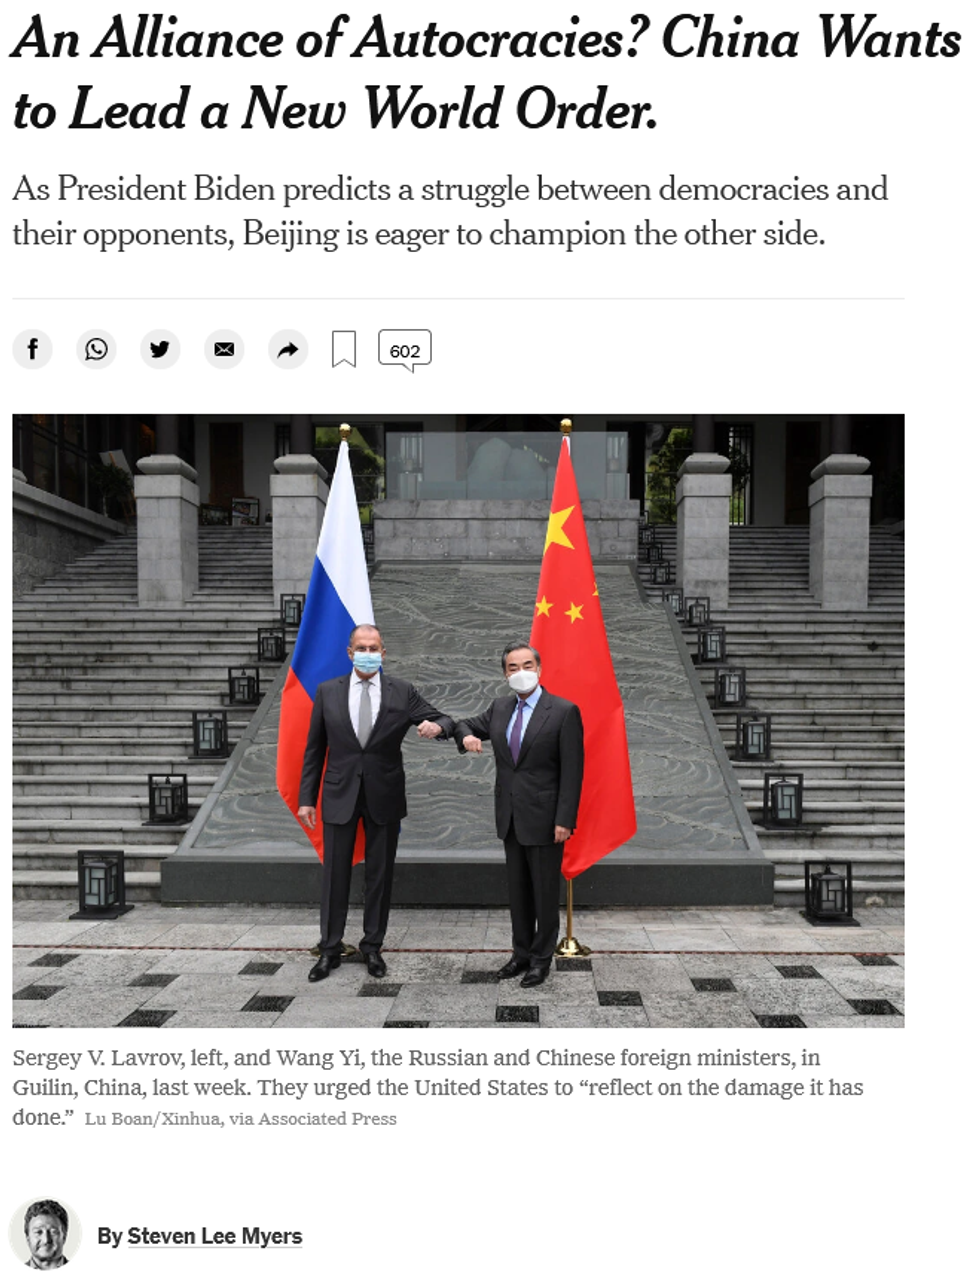 NYT: An Alliance of Autocracies? China Wants to Lead a New World Order.